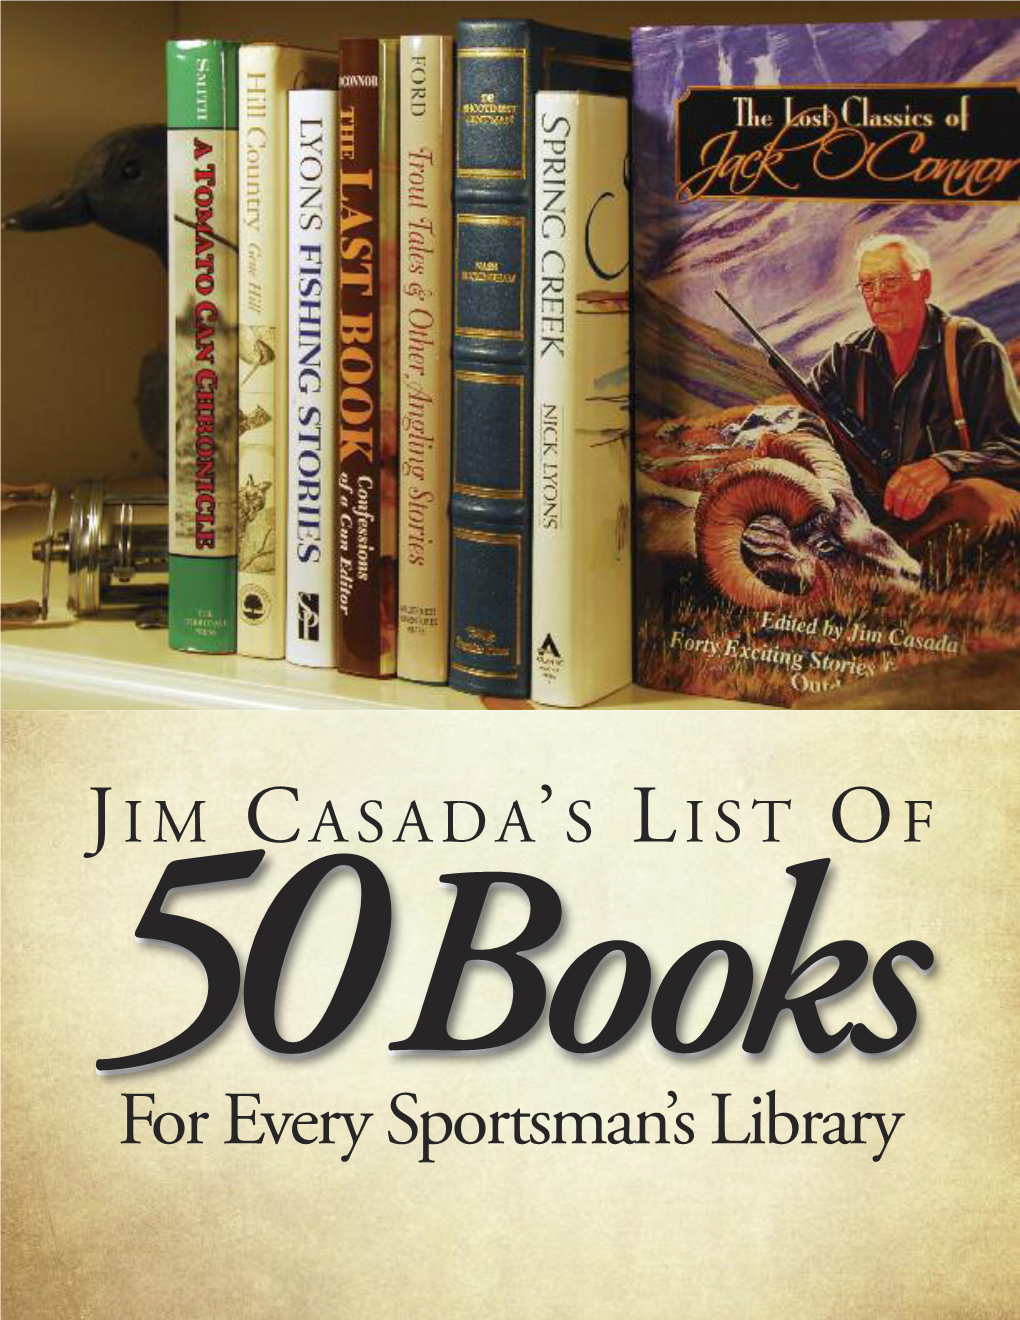 For Every Sportsman's Library